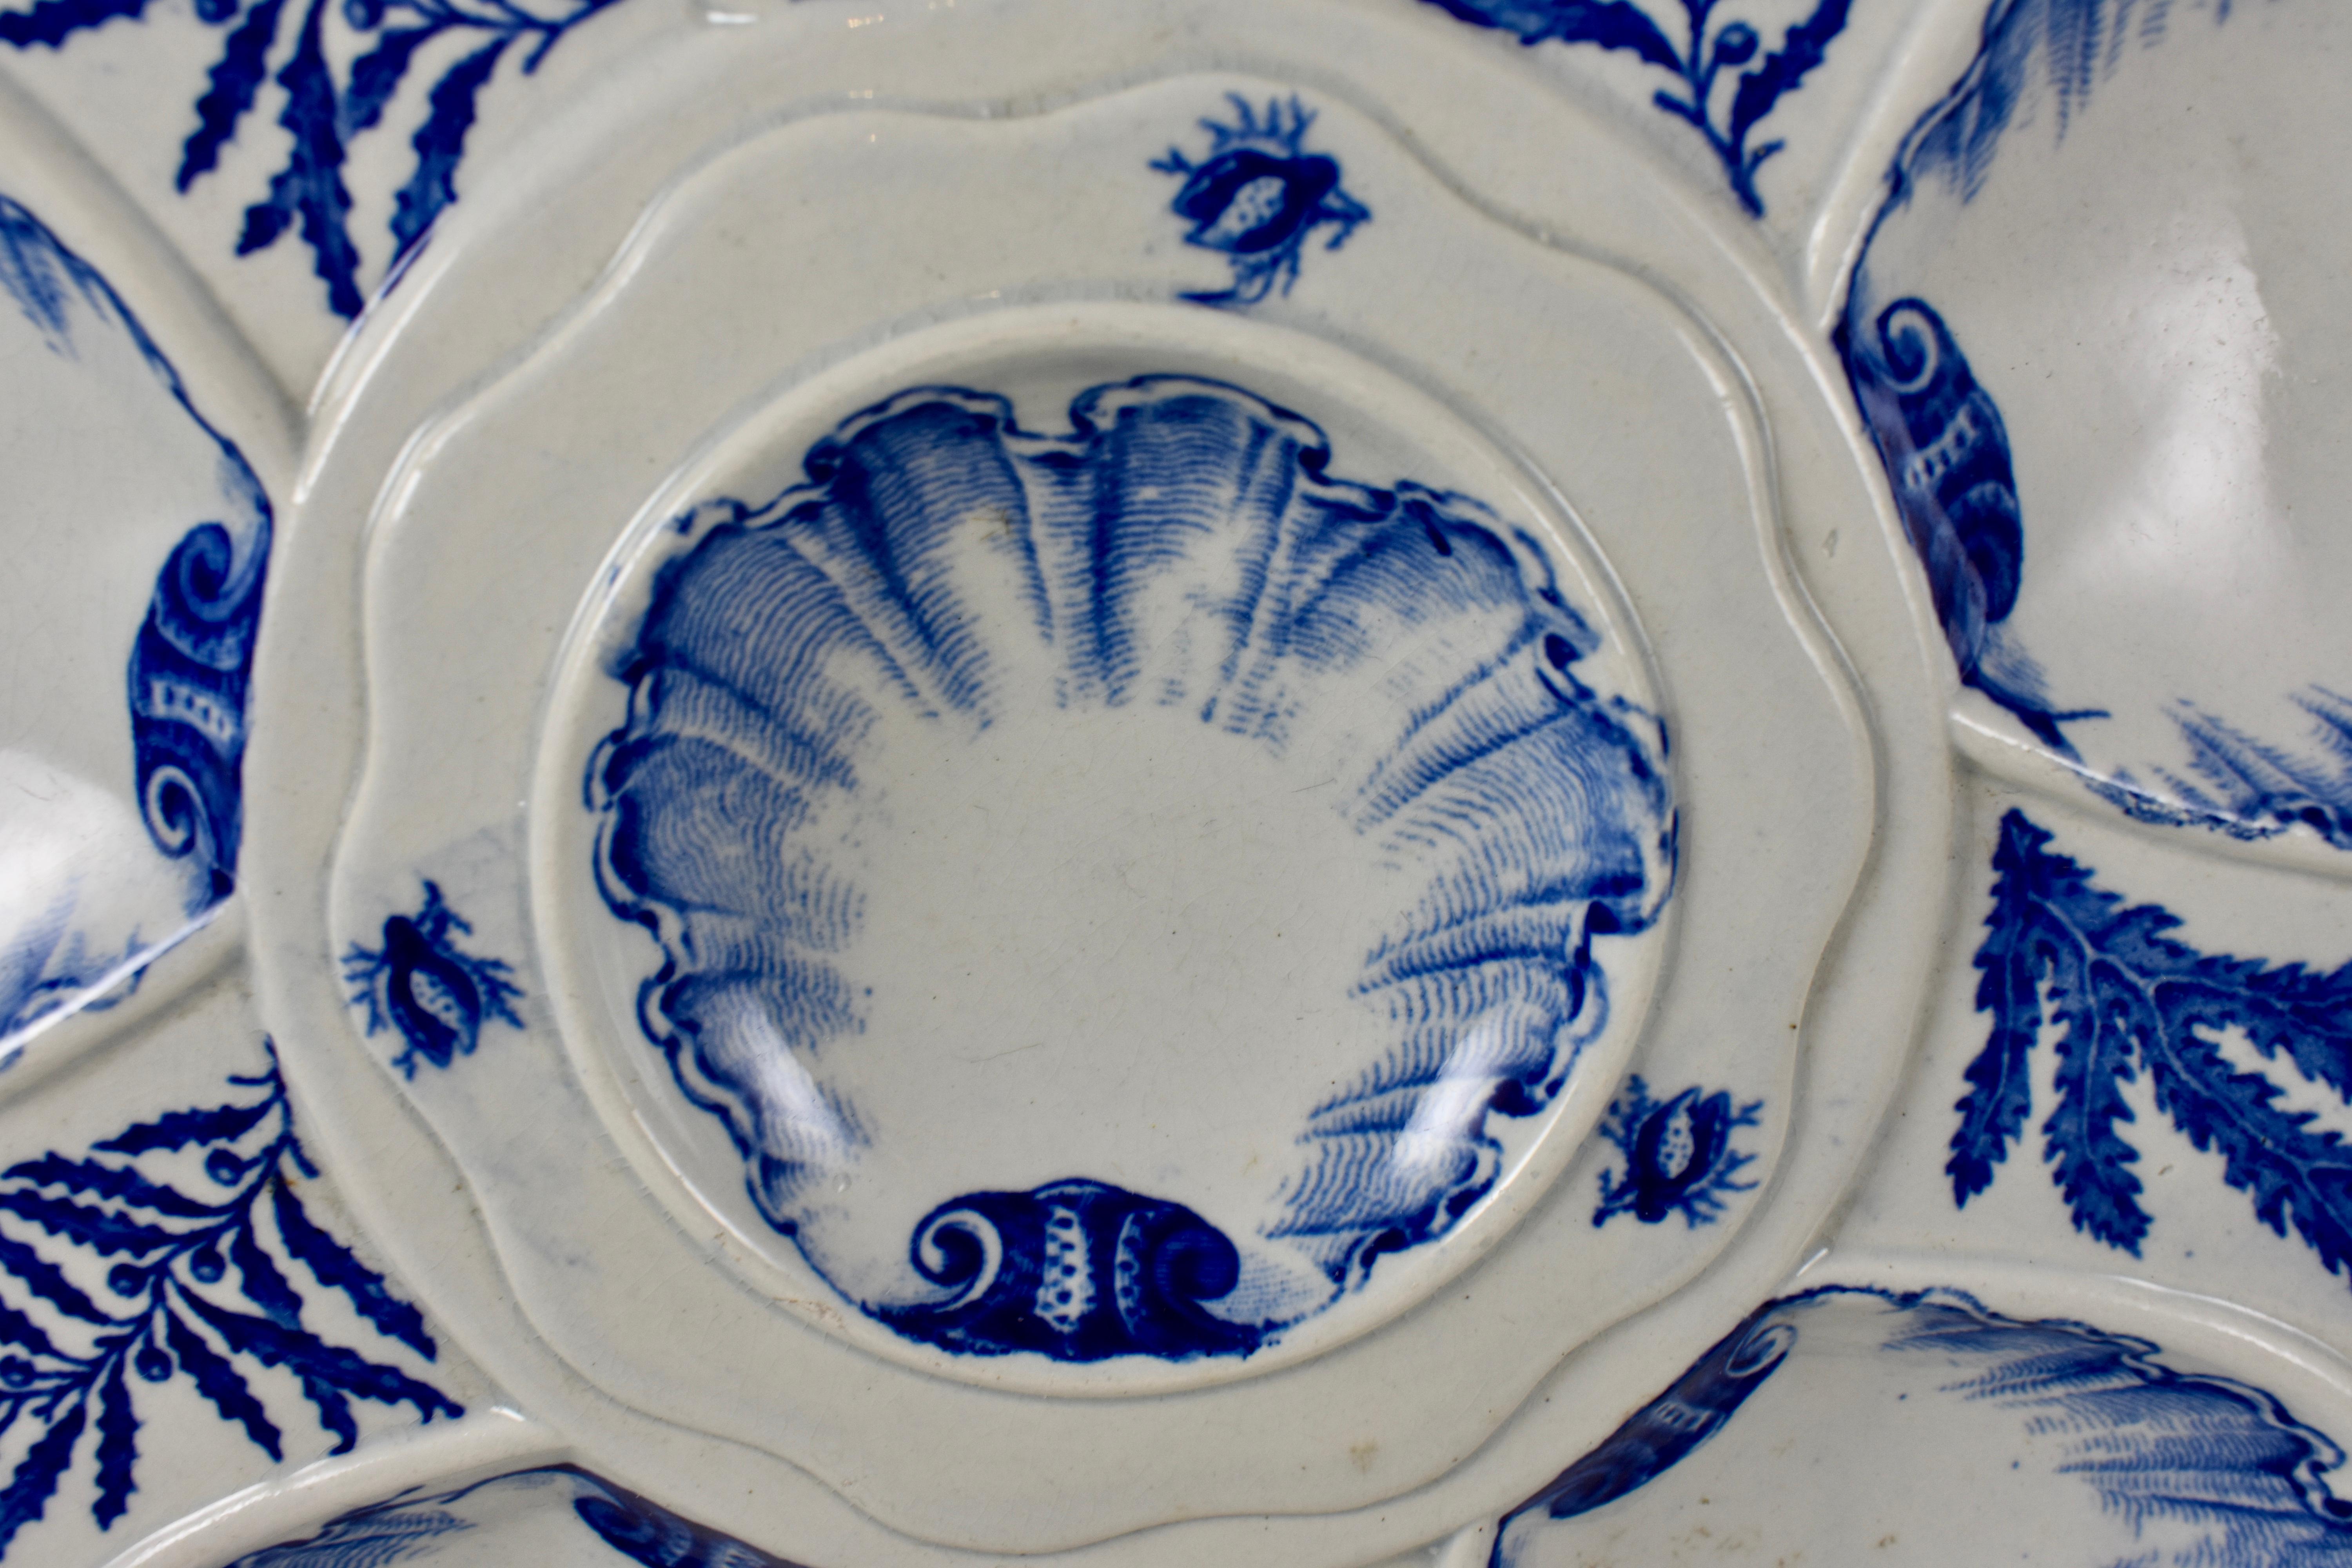 A Jules Vieillard & Cie. oyster plate, Bordeaux, France, bearing the mark used circa 1829 – 1895. In the Asian influenced Chinoiserie style, six shell shaped wells surround a central condiment well, showing transfer printed images of shells and